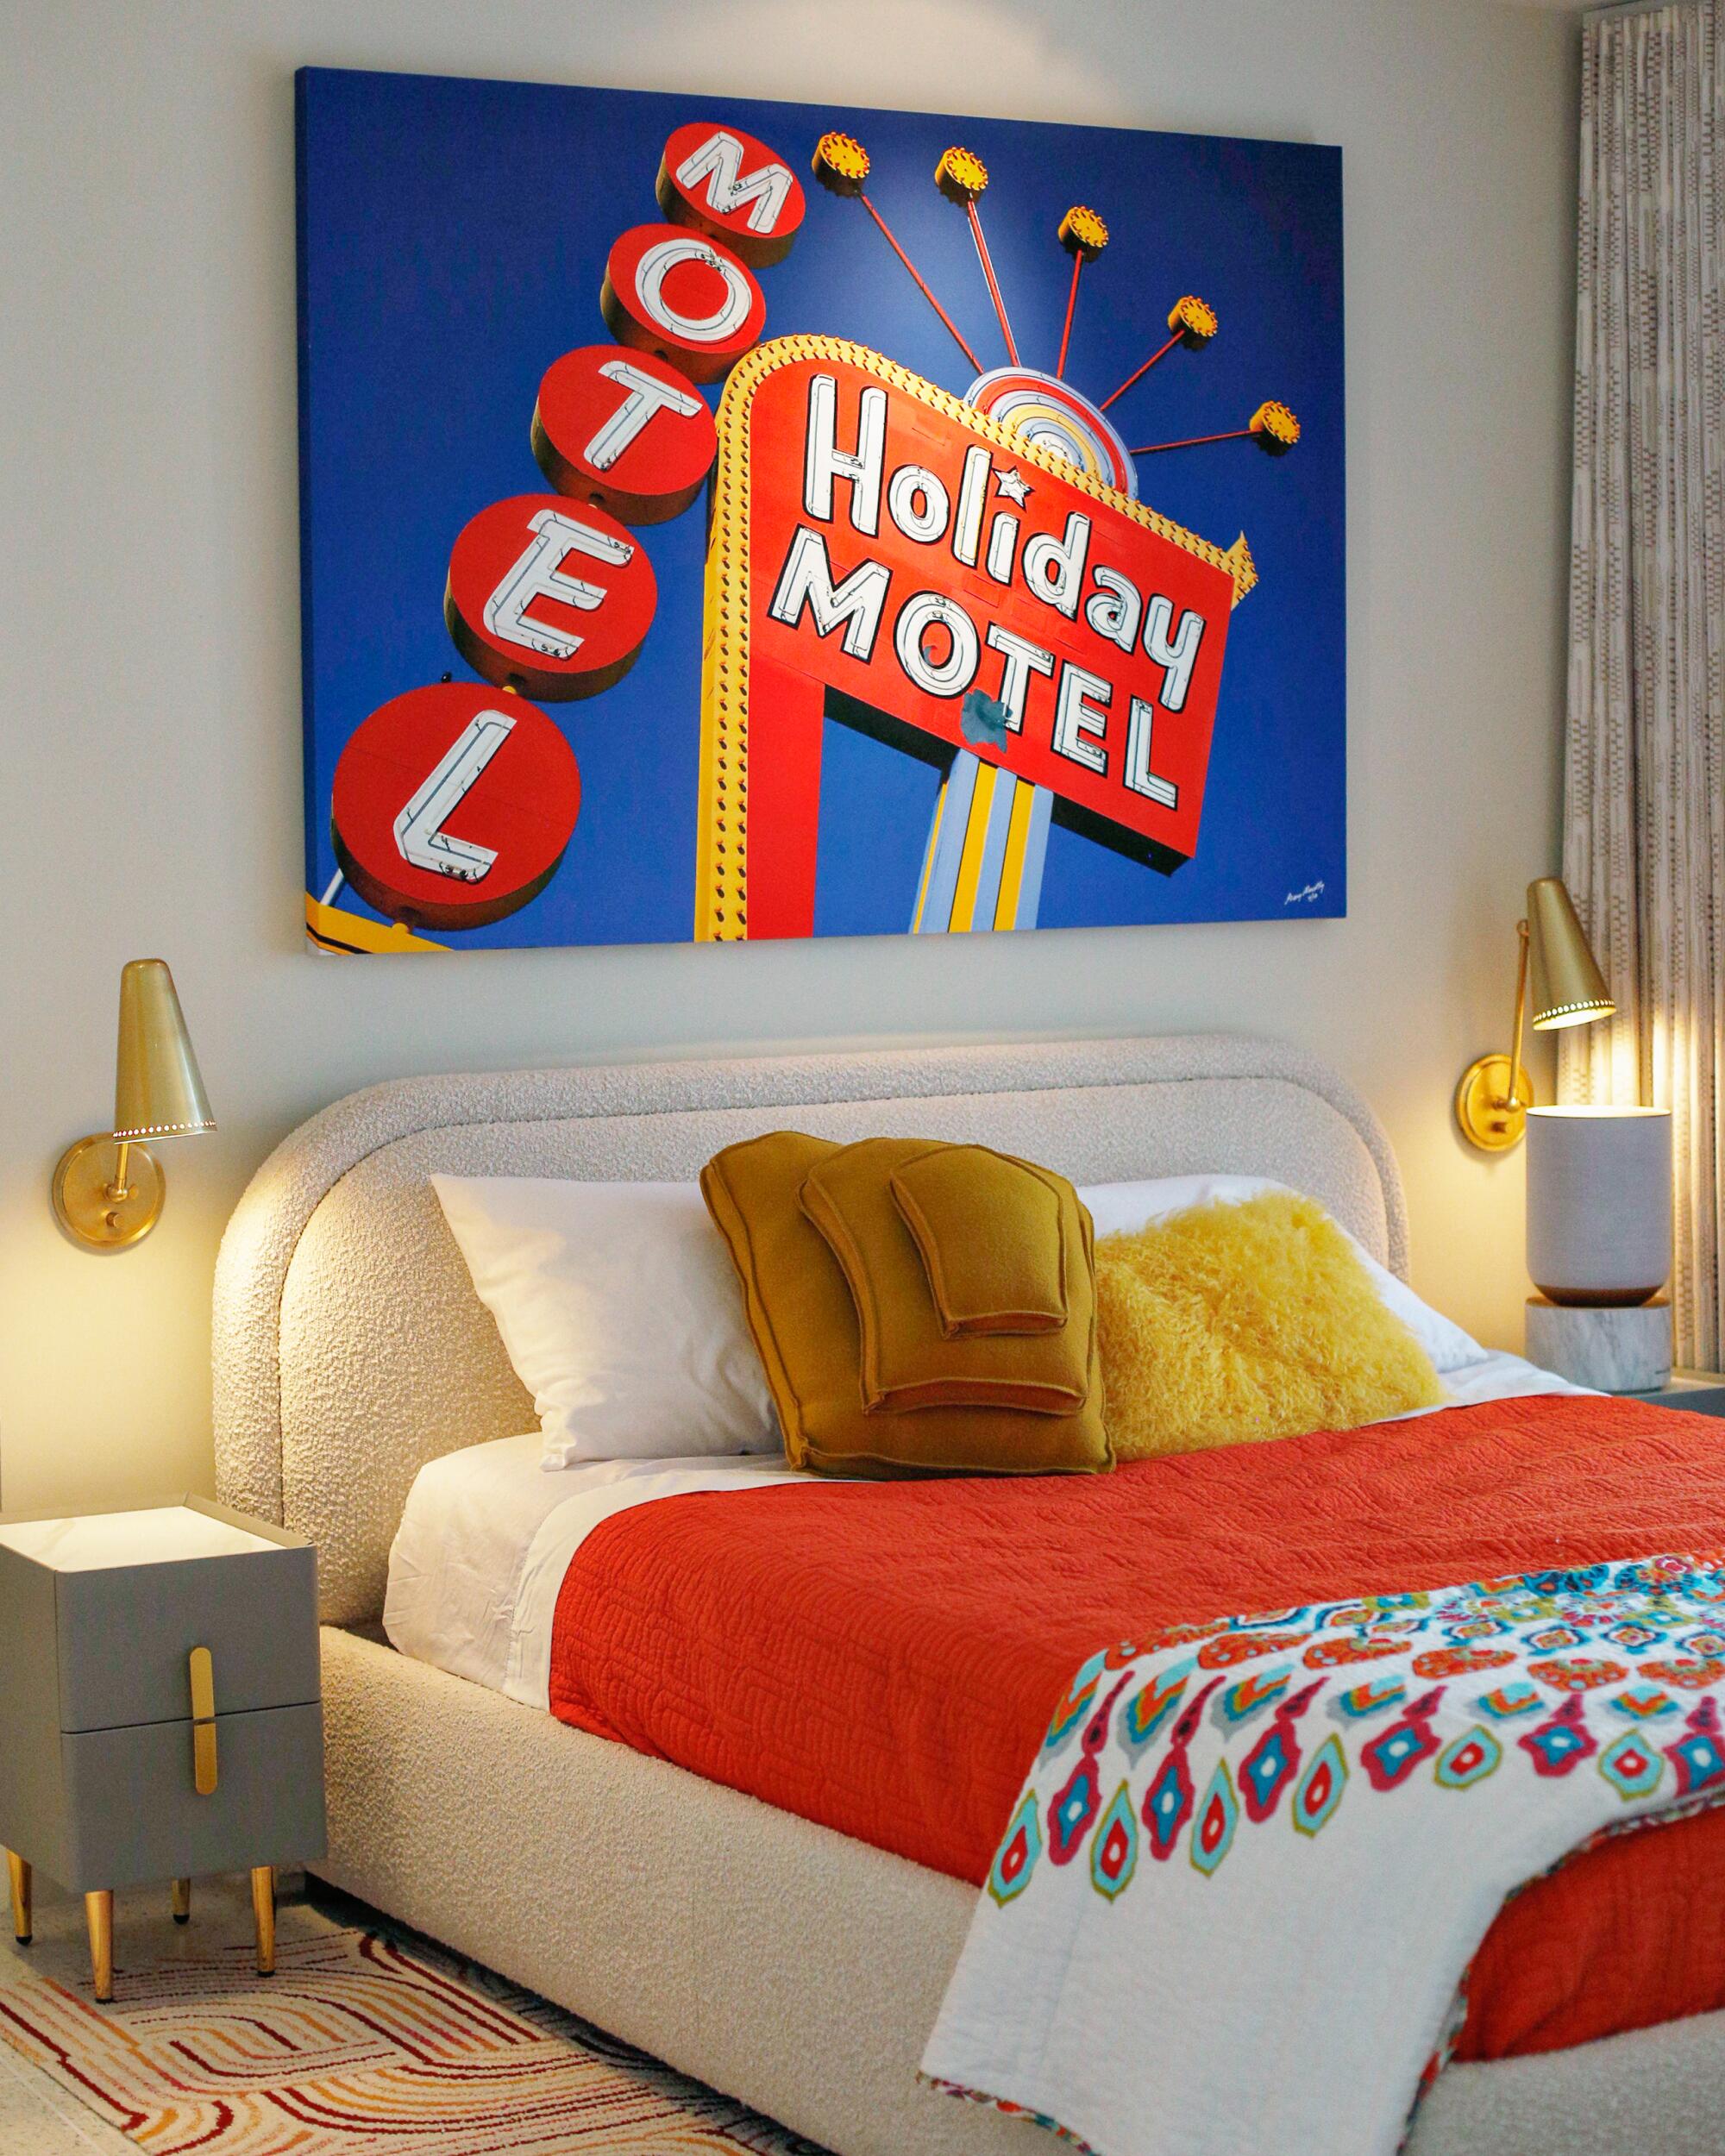 A colorful painting hangs over a bed with a red bedspread